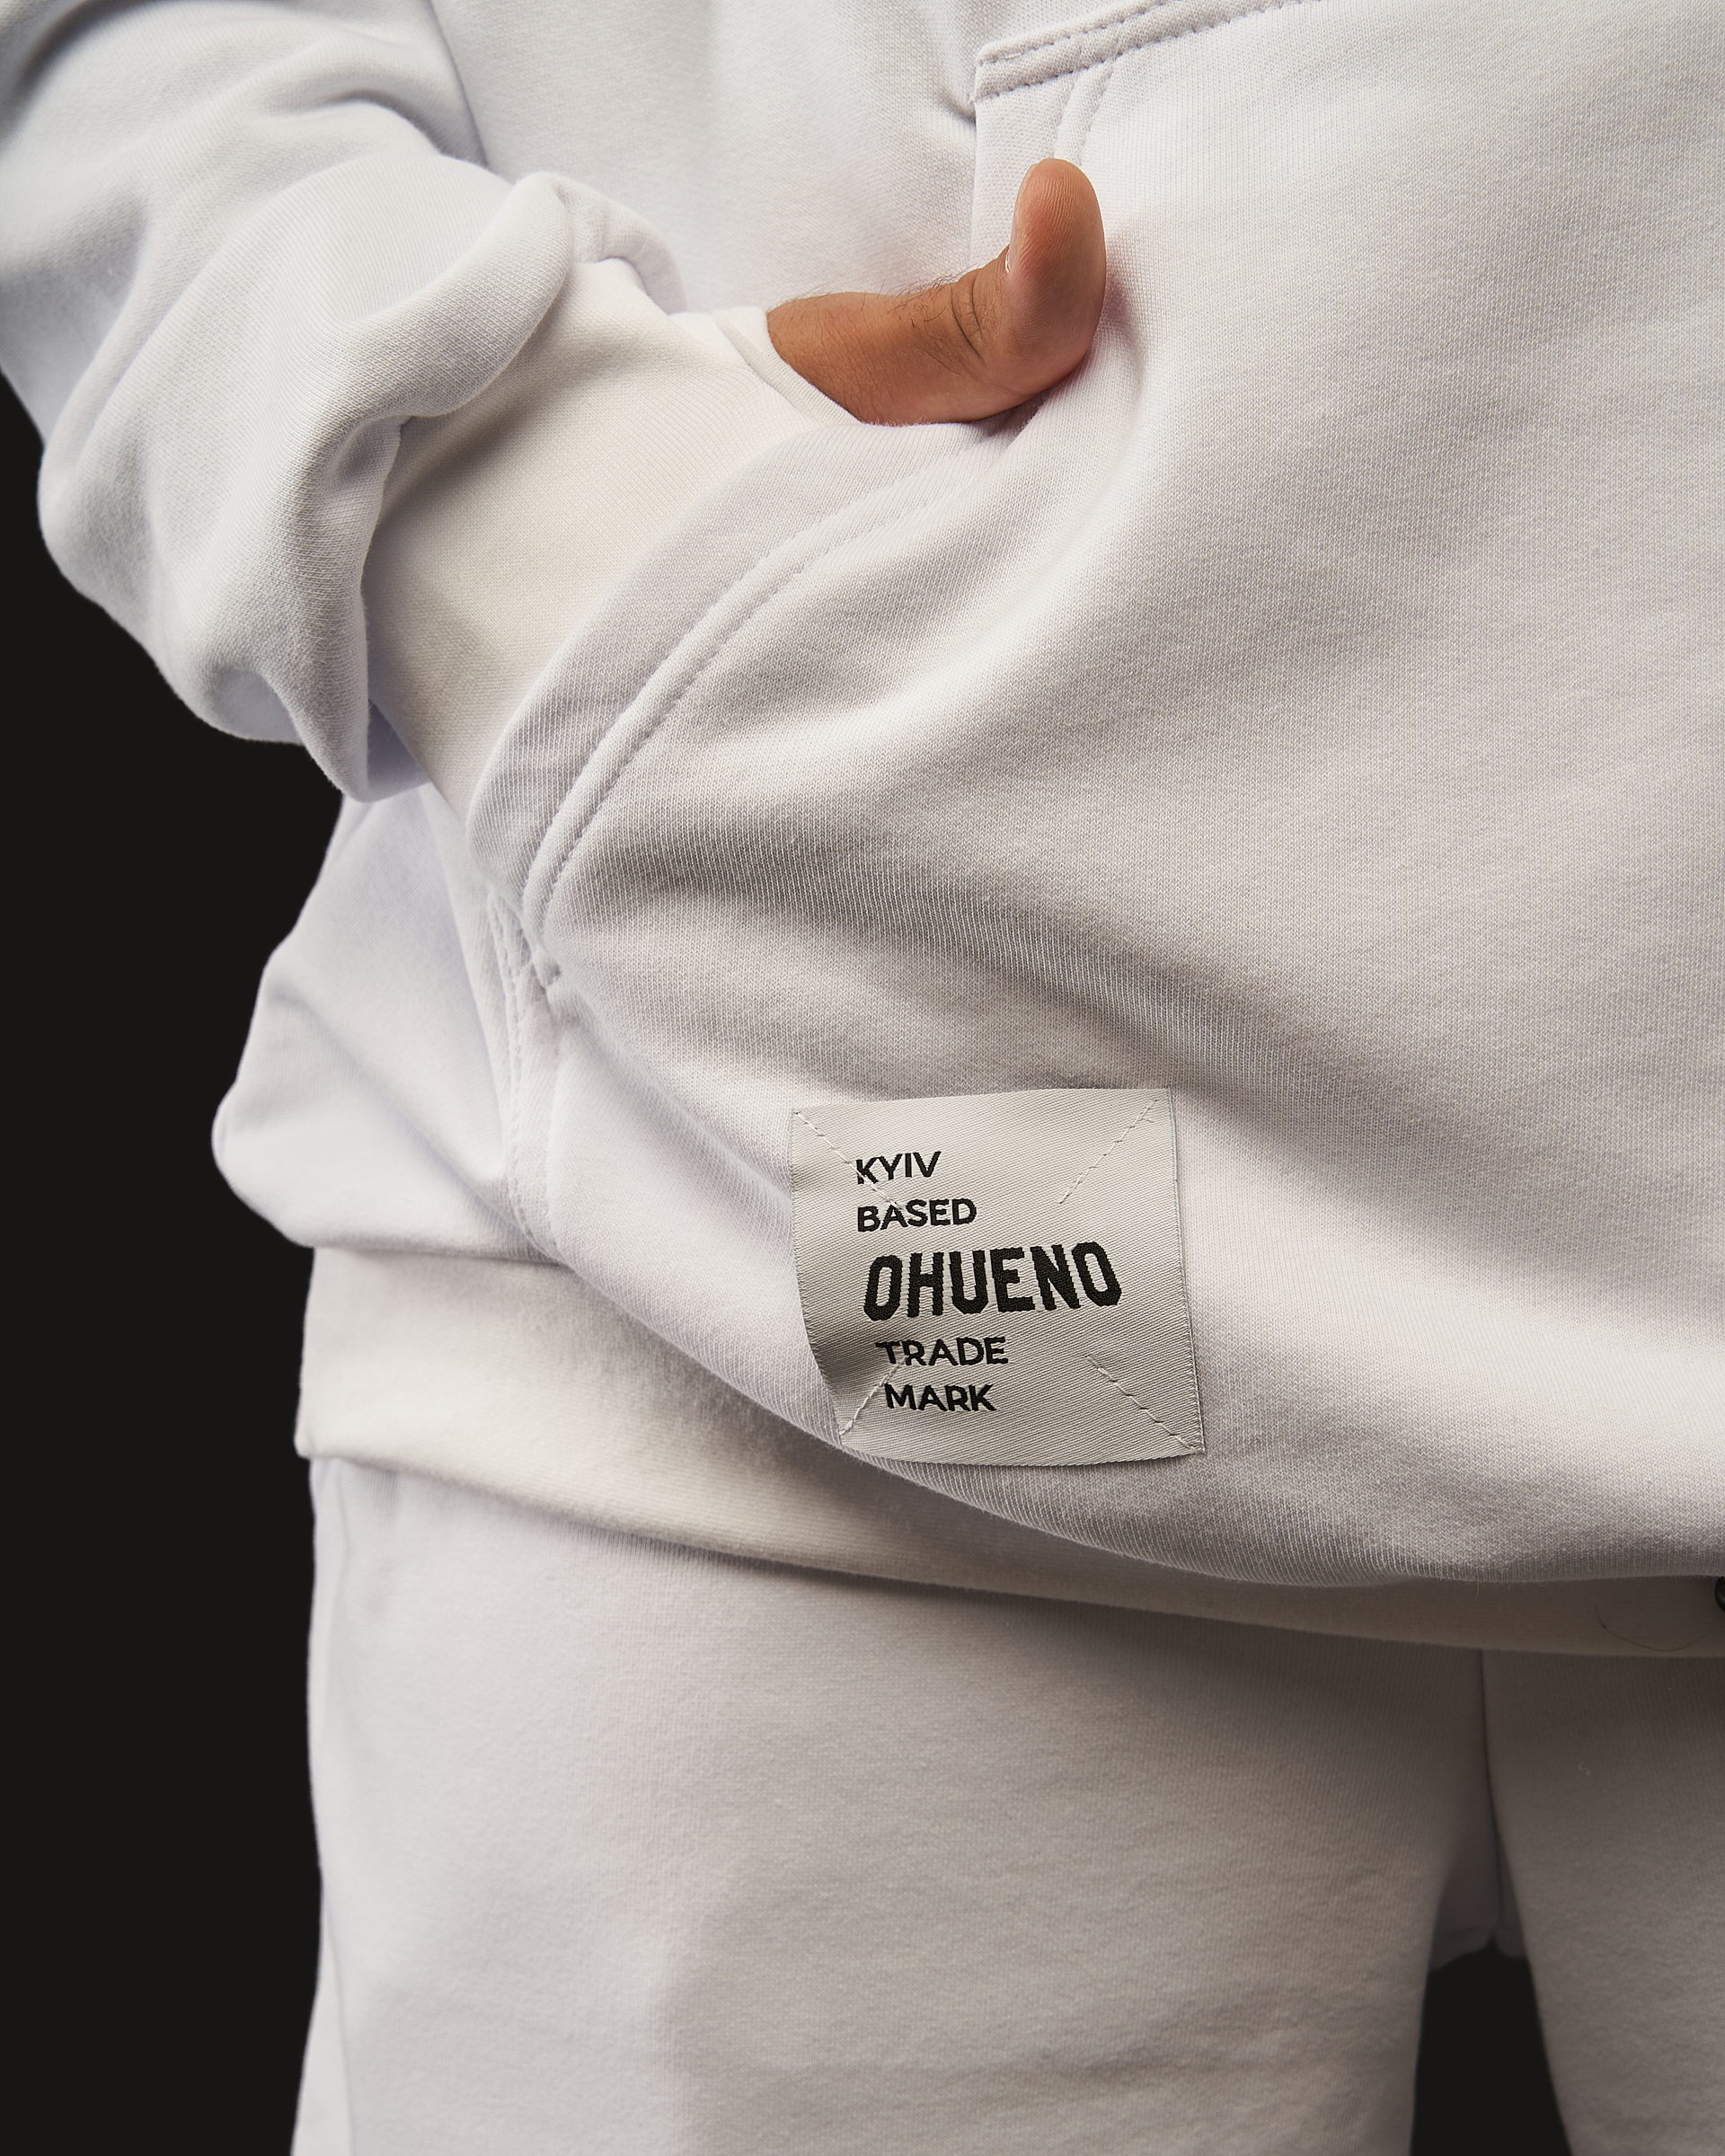 Oversized hoodie (white) Image: https://ohueno-official.com/wp-content/uploads/m01980.jpg